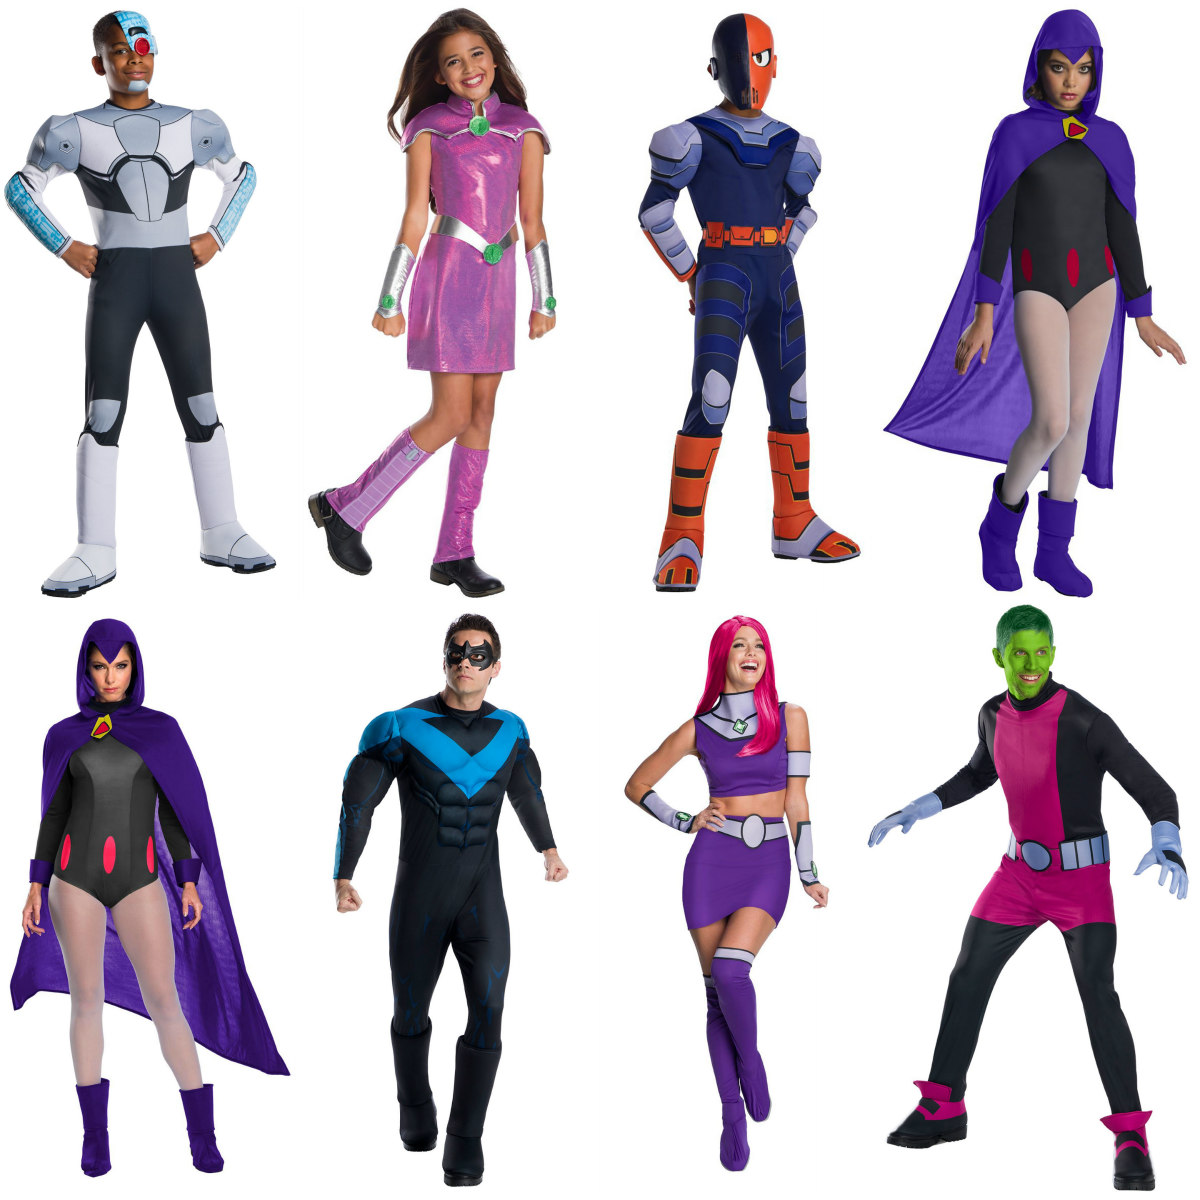 The Ultimate Cartoon Character Costumes for an Animated Saturday Morning [ Costume Guide]  Blog